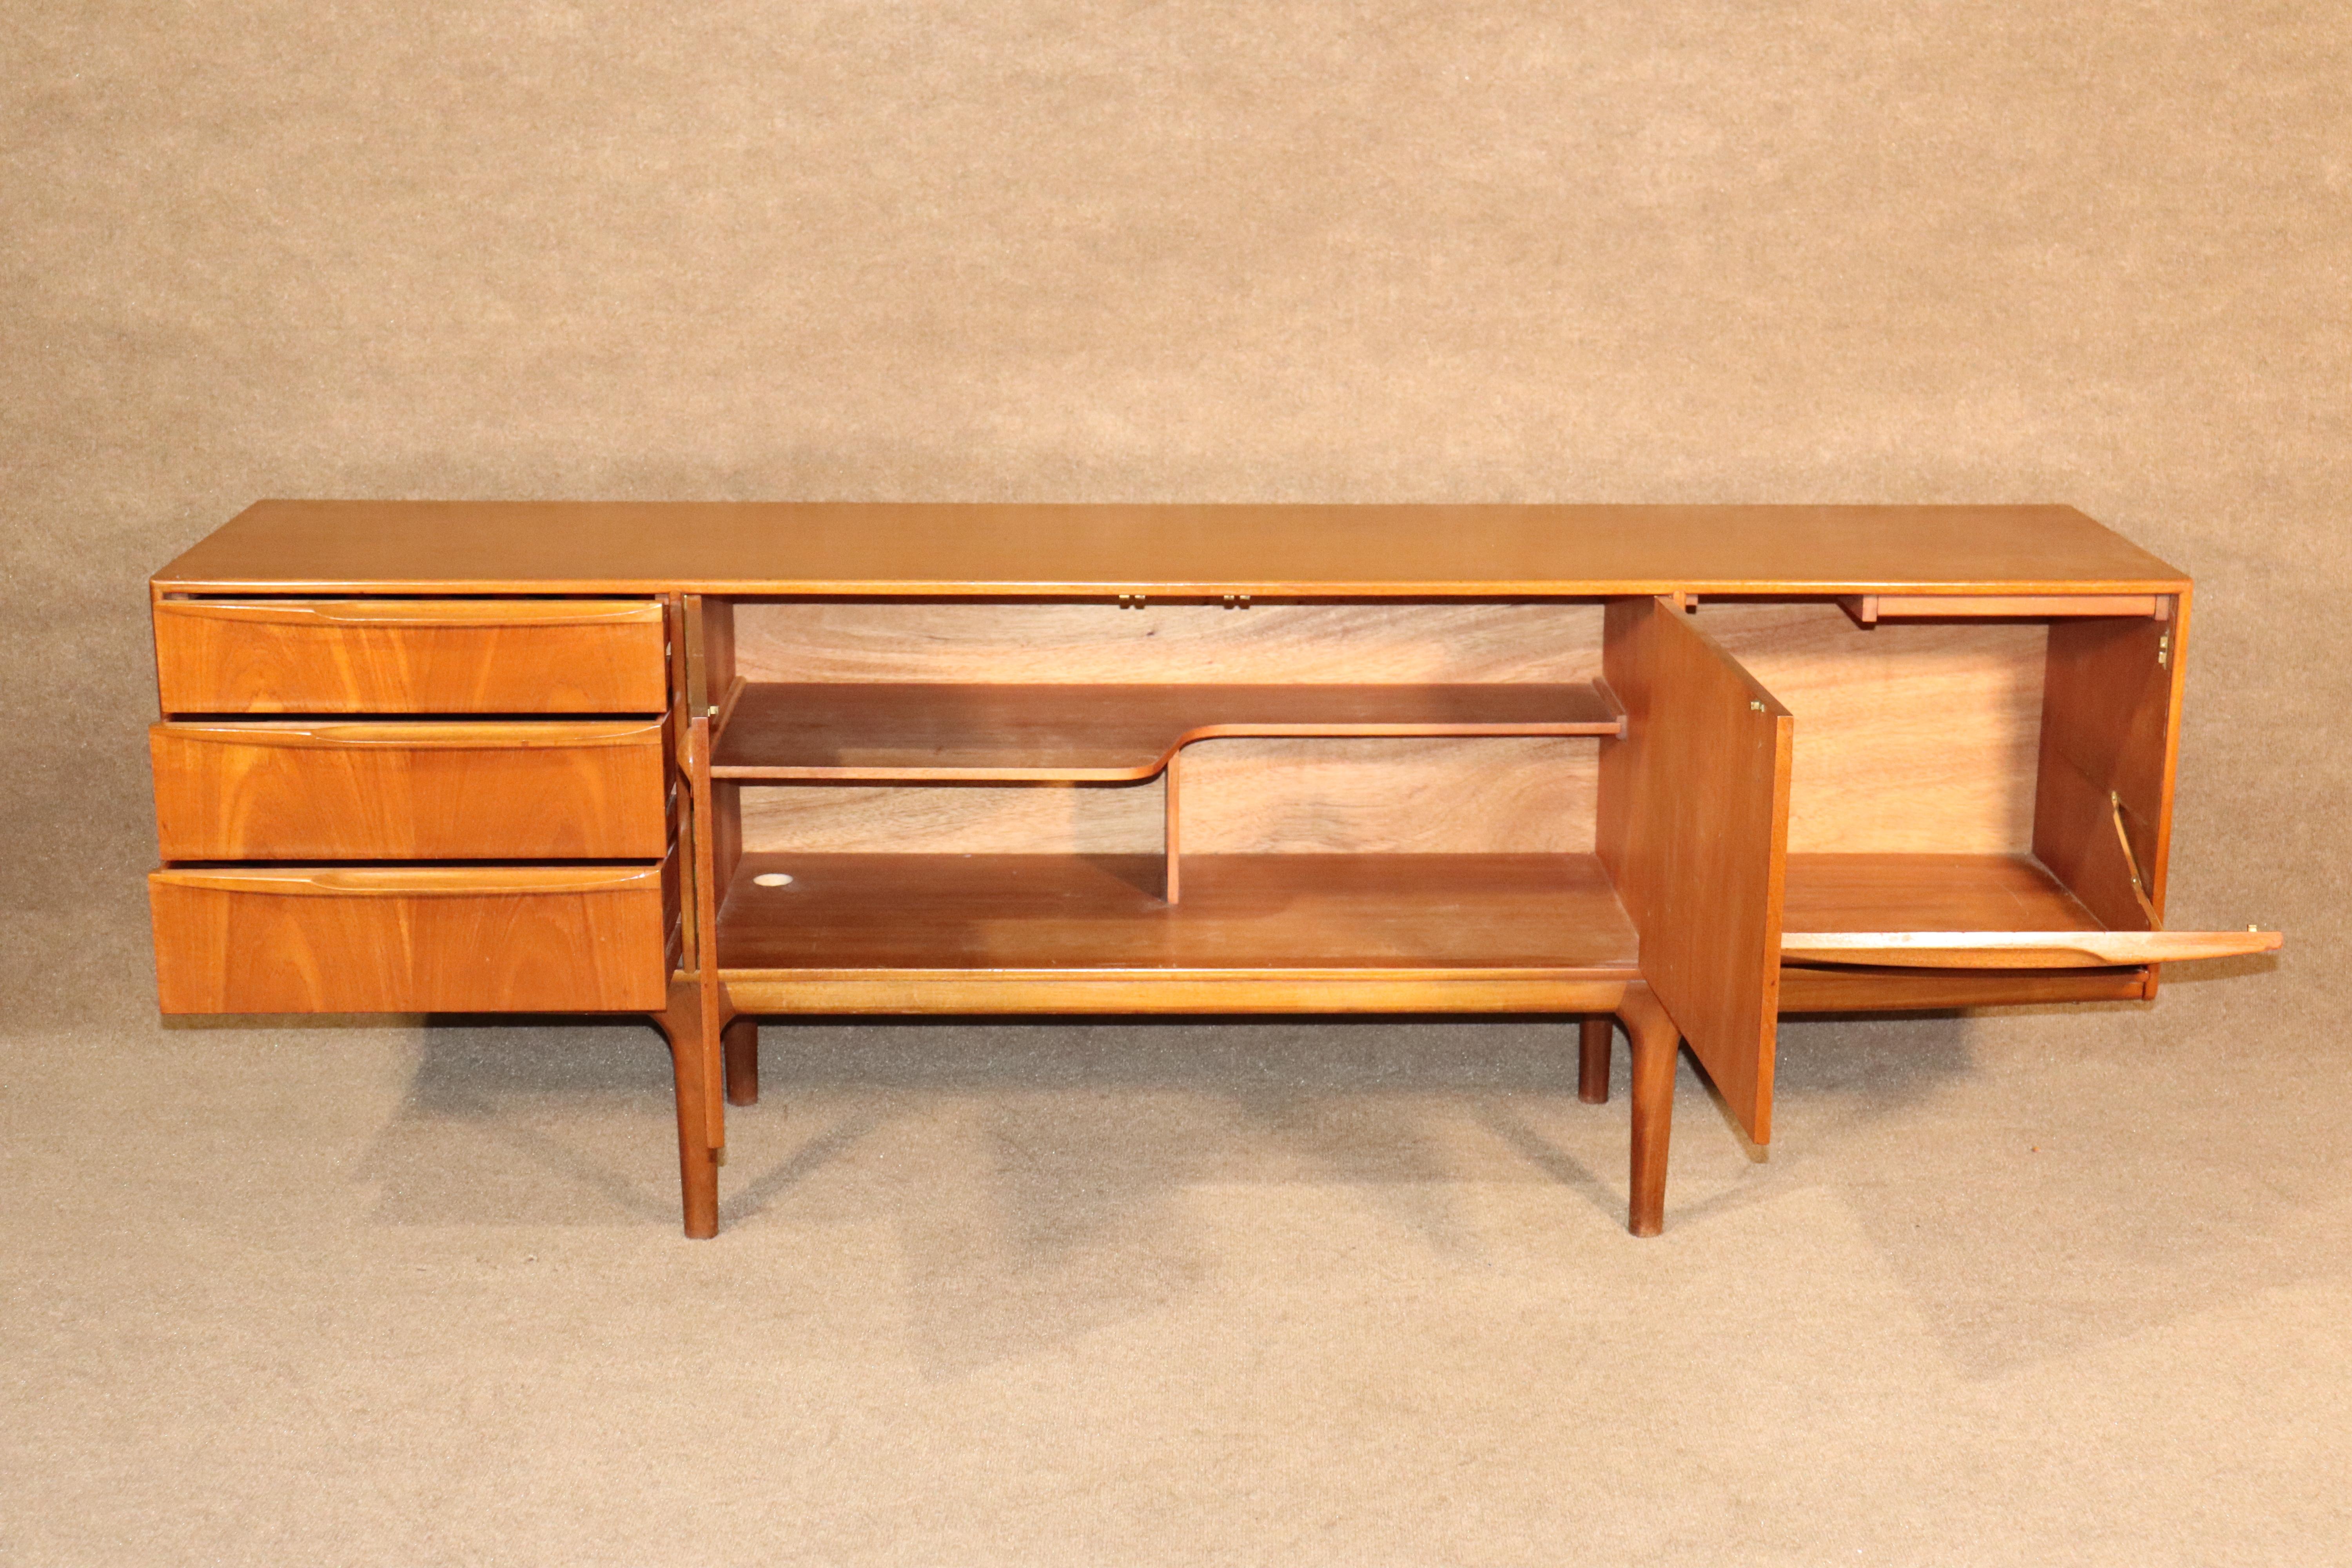 Long Danish modern sideboard with sculpted accents. Handsome mid-century design with unique storage. Drawers, cabinet, and flip down bar storage. Sculpted wood handles and tapered legs finish out this beautiful credenza.
Please confirm location.